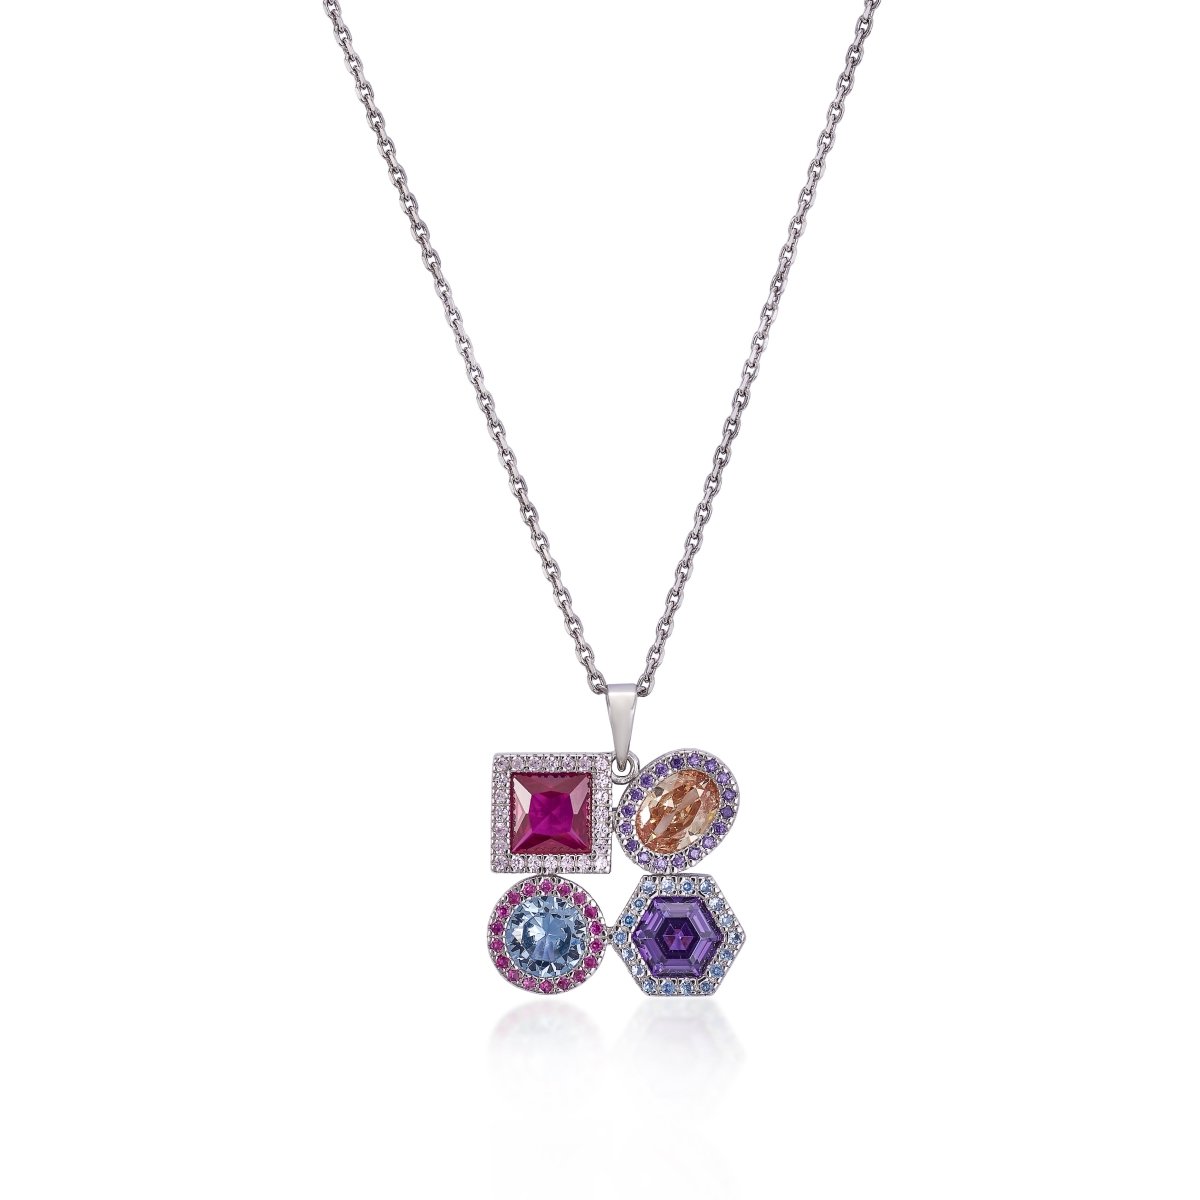 Necklace - Necklaces with anthracite charoite stones and zircons